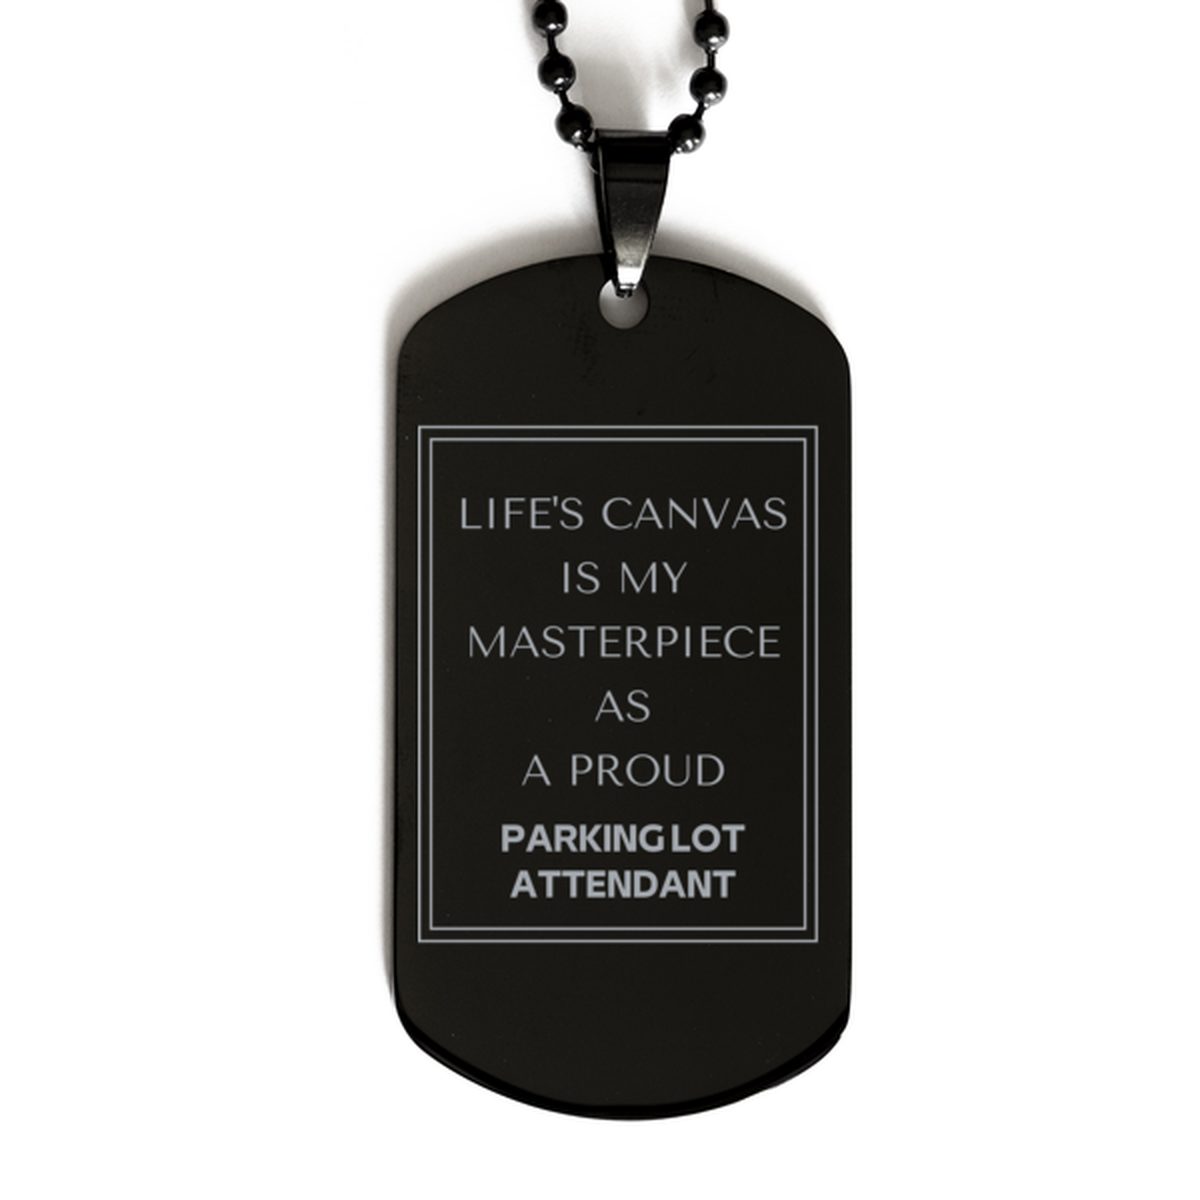 Proud Parking Lot Attendant Gifts, Life's canvas is my masterpiece, Epic Birthday Christmas Unique Black Dog Tag For Parking Lot Attendant, Coworkers, Men, Women, Friends